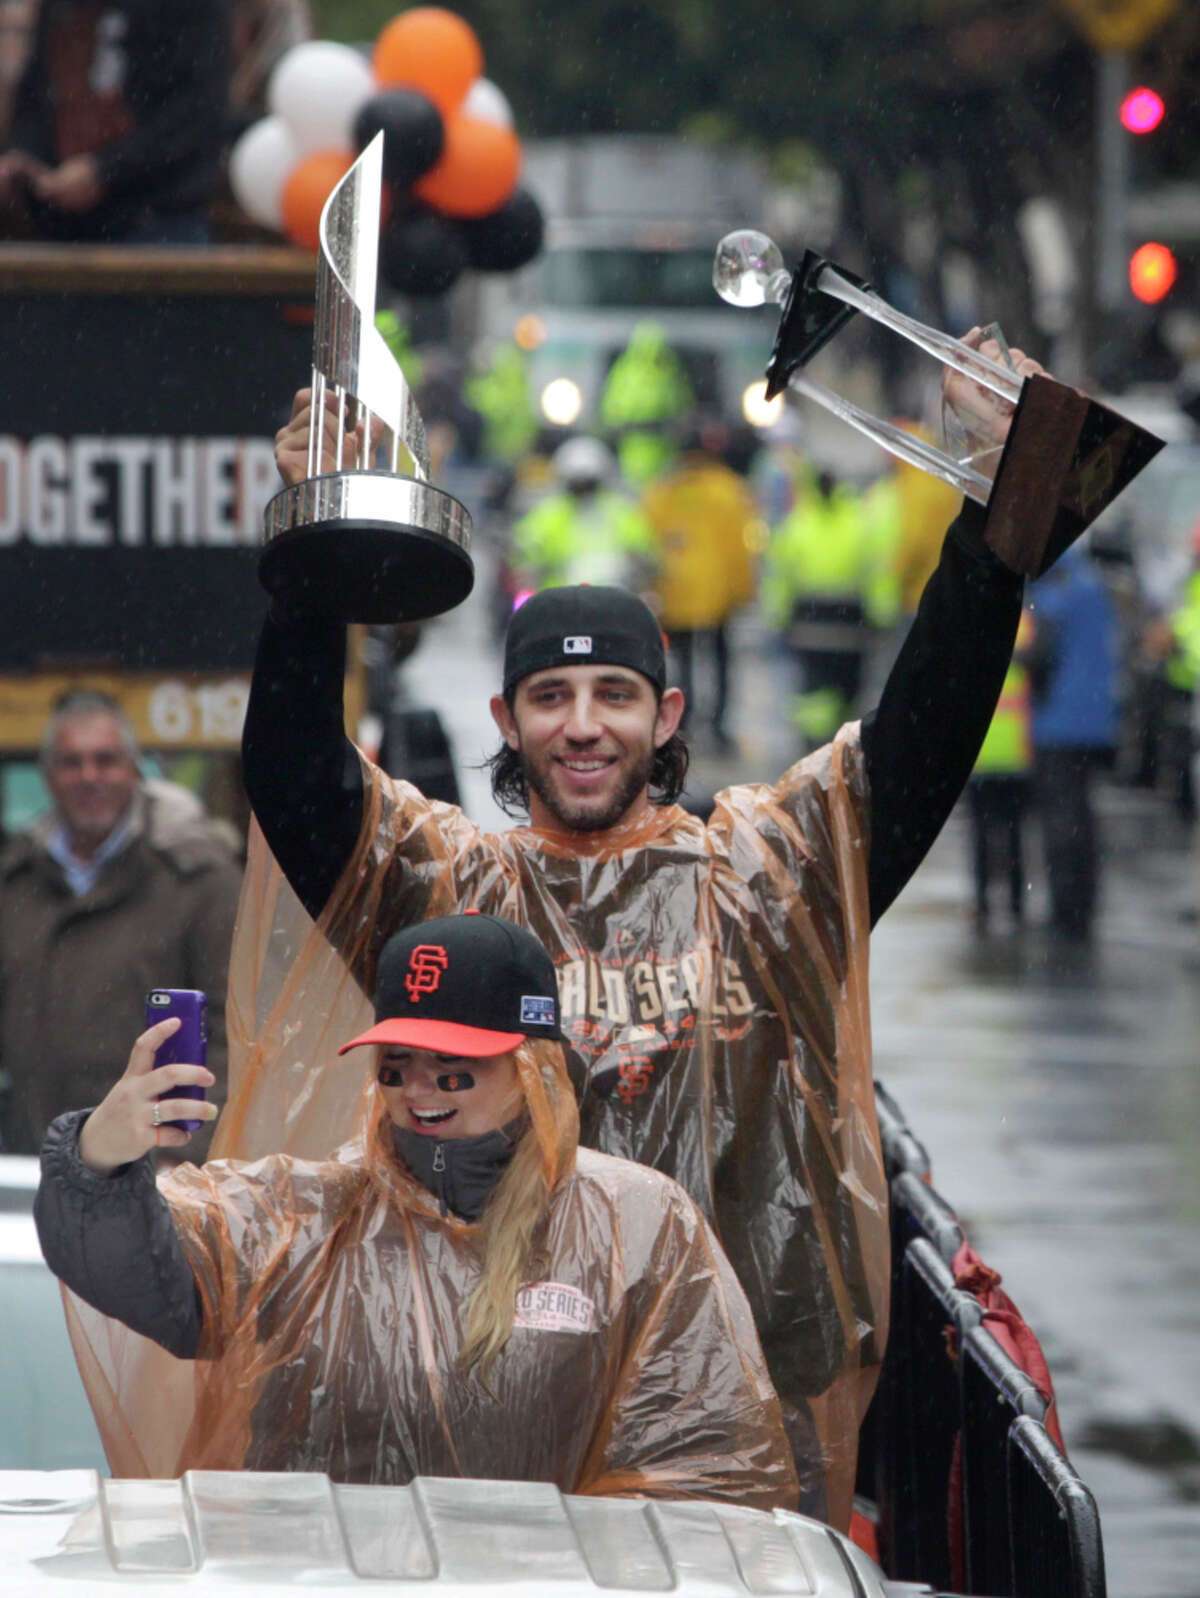 Bumgarner's MVP of Giants' victory parade, too